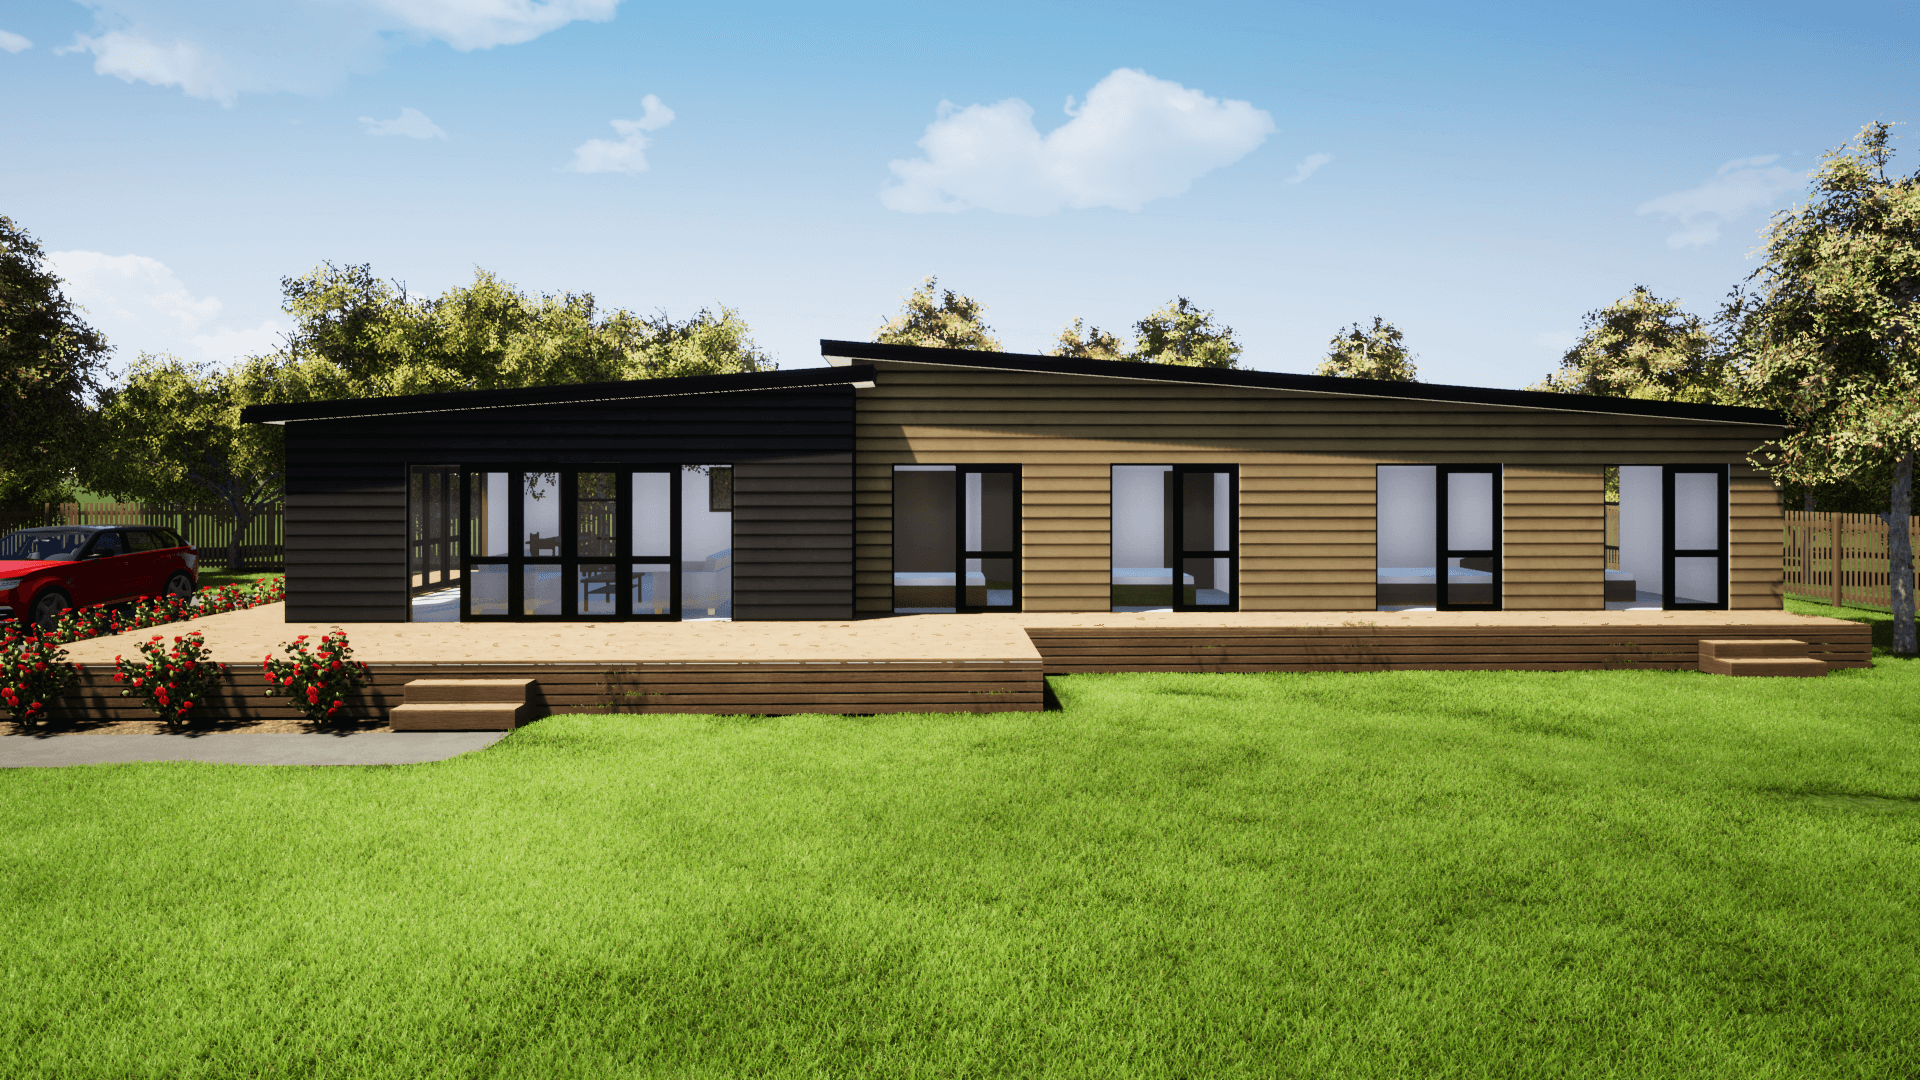 4 bedroom prefab home with large deck area